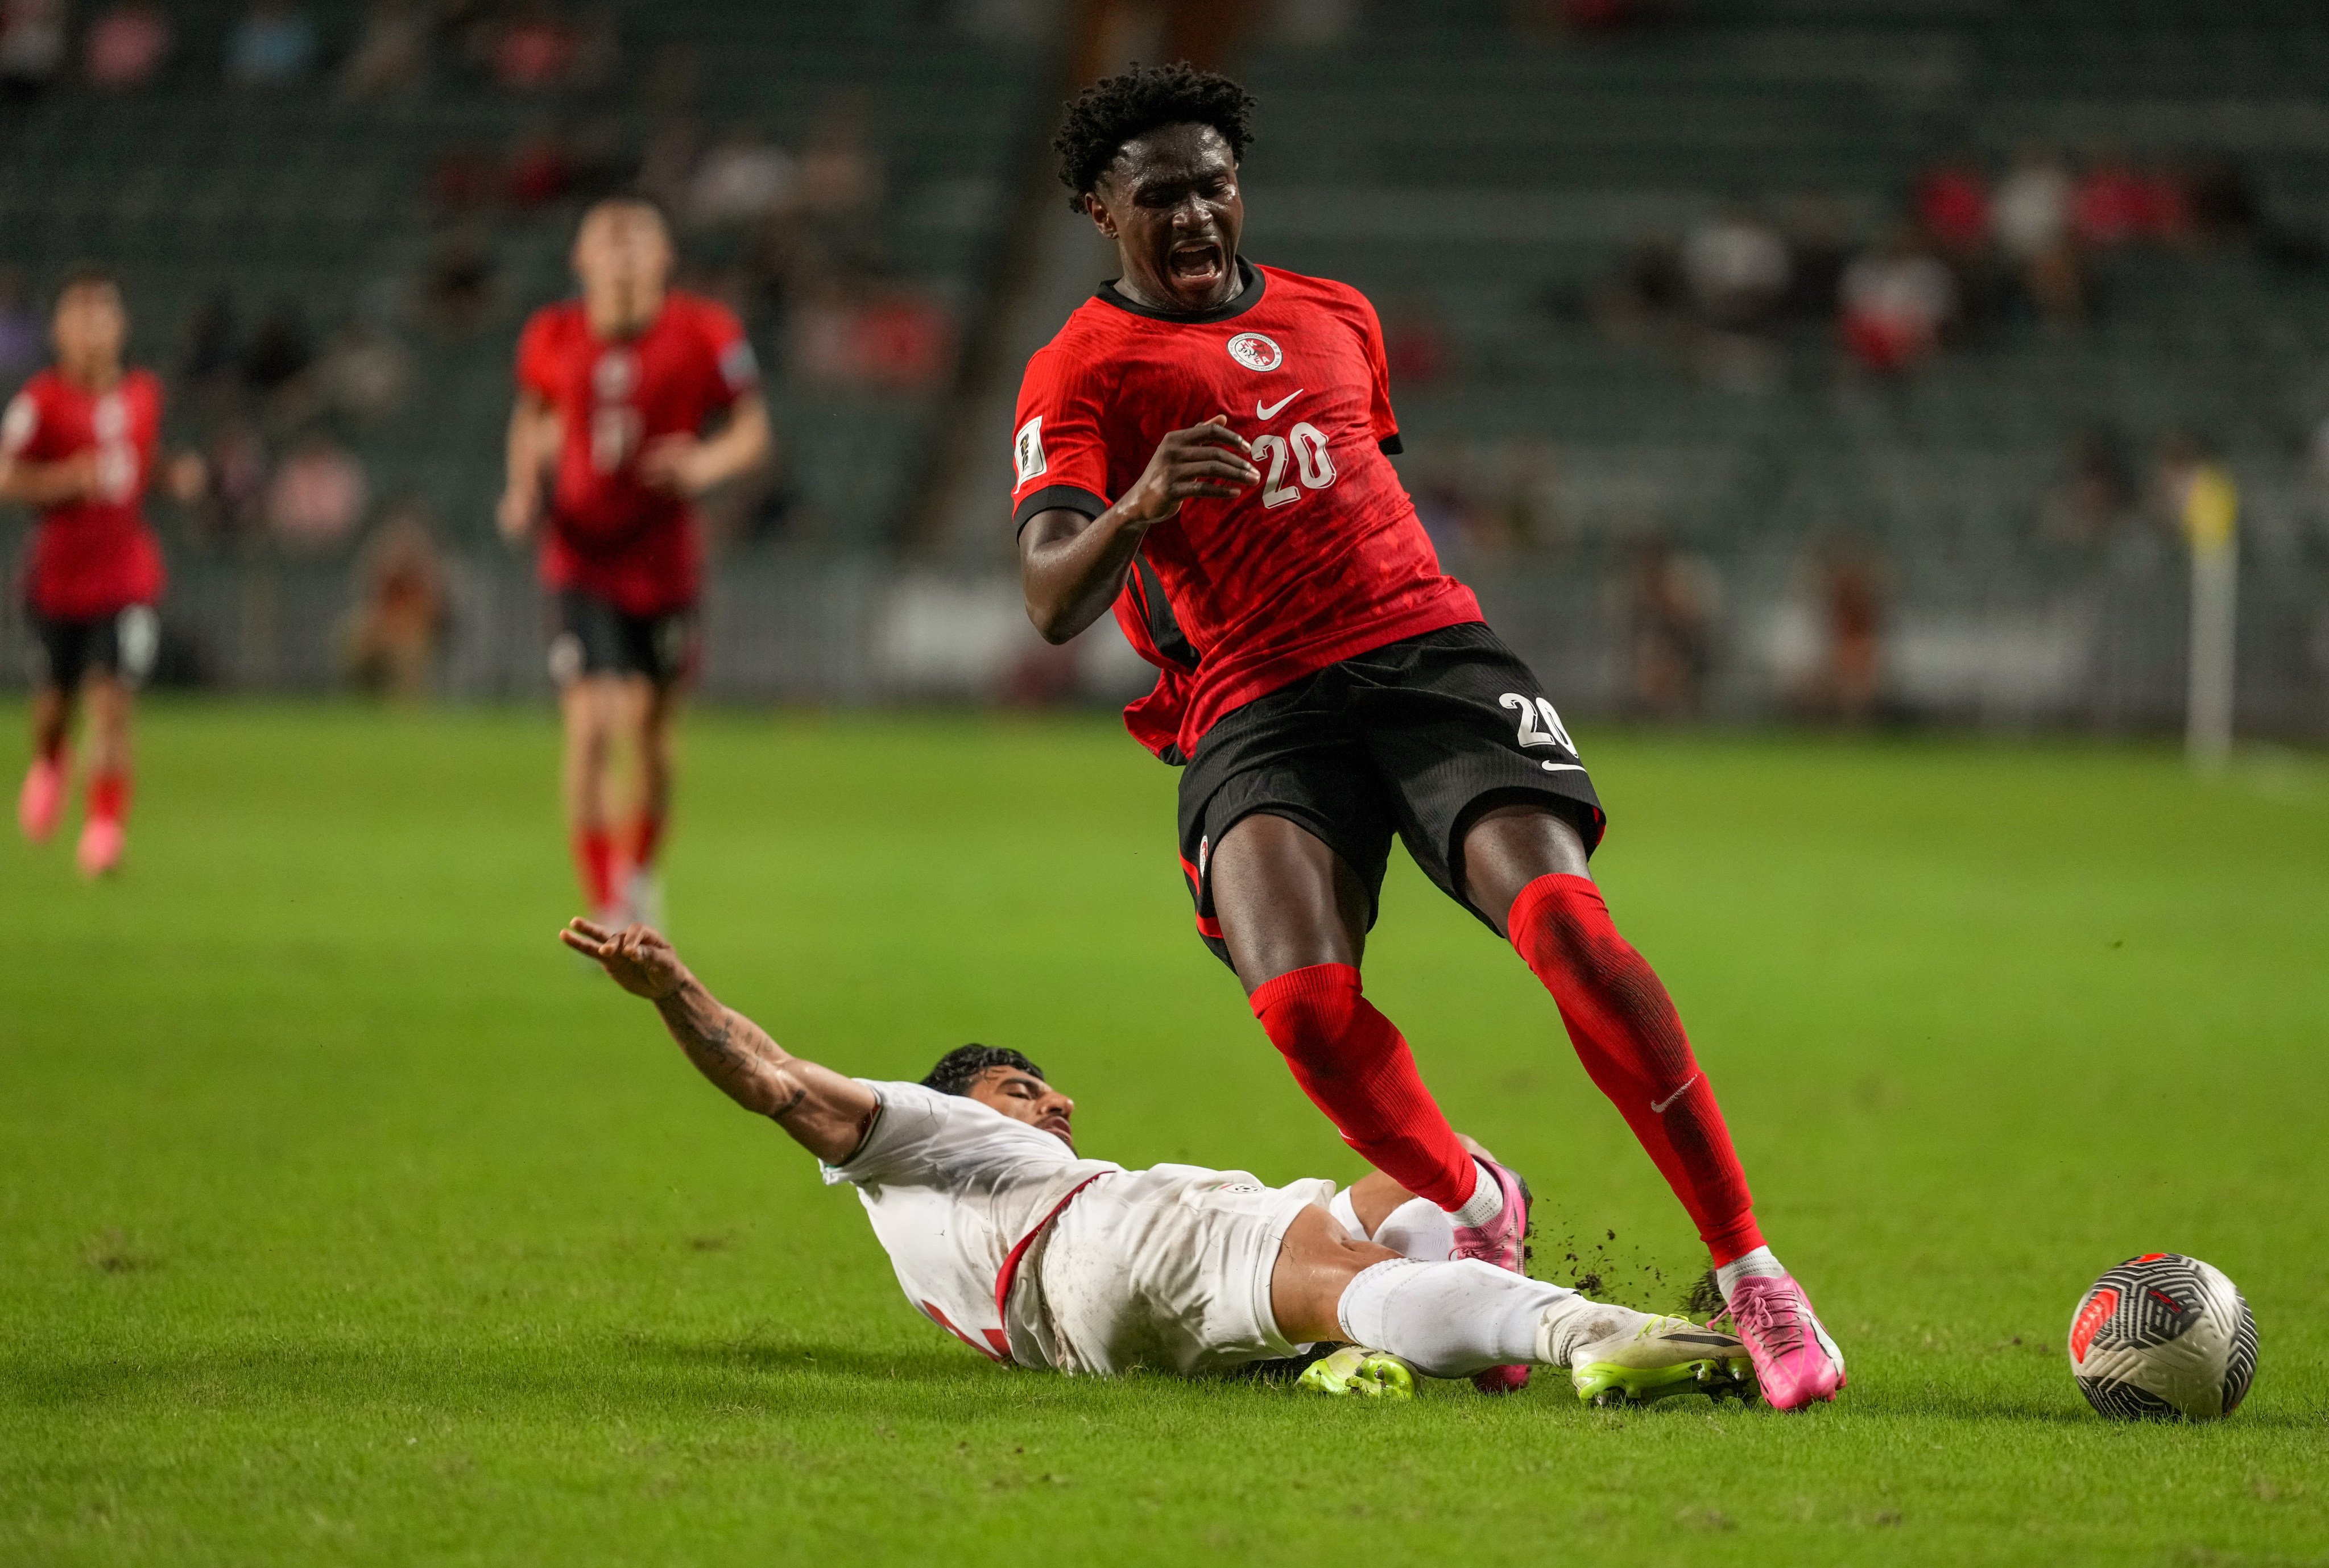 Hong Kong China’s Michael Udebuluzor is likely to make a move on a free transfer at the end of June. Photo: Sam Tsang